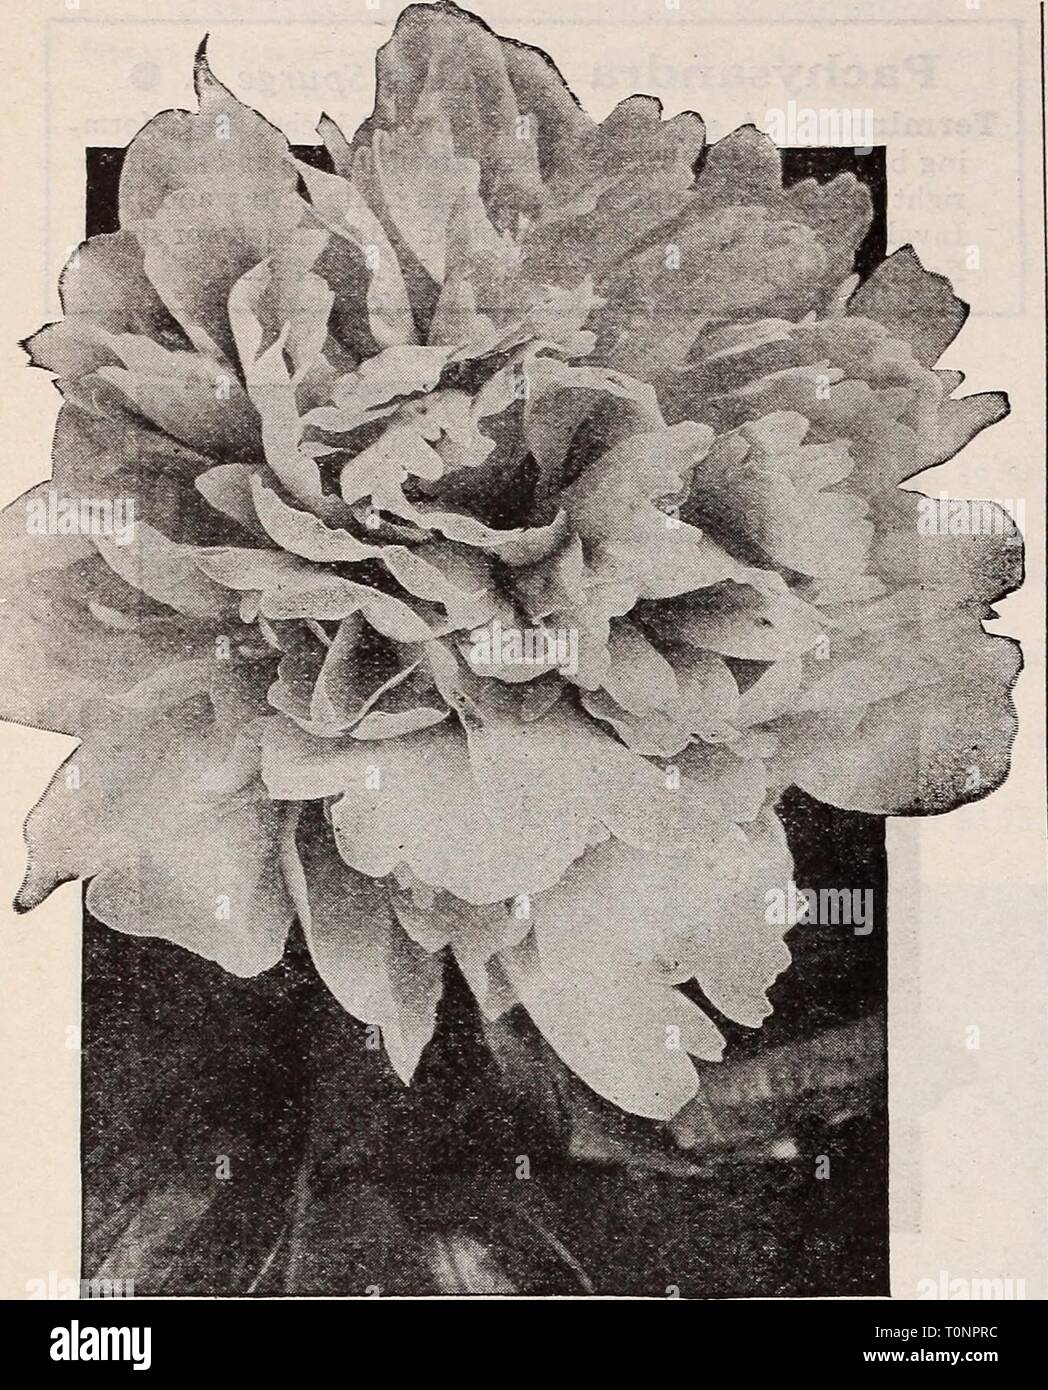 Dreer's bulbs plants, shrubs and Dreer's bulbs plants, shrubs and seeds for fall planting : autumn 1937  dreersbulbsplant1937henr Year: 1937  Dreer Quality HARDY PERENNIAL PLANTS for Fall Planting    Peony, Festiva Maxima Beautiful Double Peonies Peonies are indispensable. They bring to the spring garden masses of large showy flowers carried on fine strong stems. Tn addition to their value for garden display they also enjoy the greatest popularity because they are splendid for cutting. Albert Crousse (Tall, Late). Very large, rosy white flowers flecked crimson. A free bloomer; splendid for cut Stock Photo